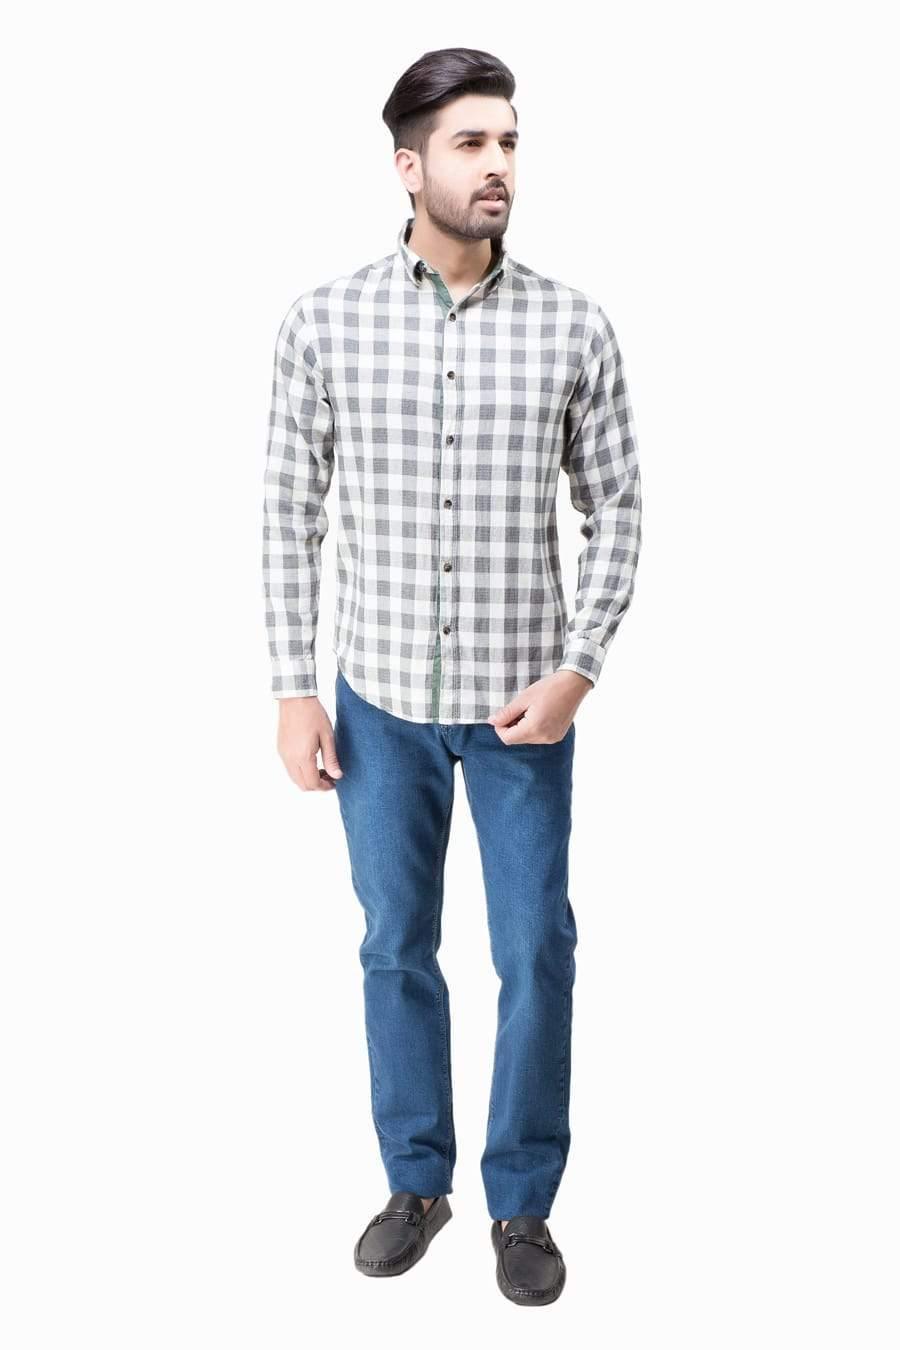 CASUAL SHIRT FULL SLEEVES  GREEN WHITE CHECK WINTER at Charcoal Clothing